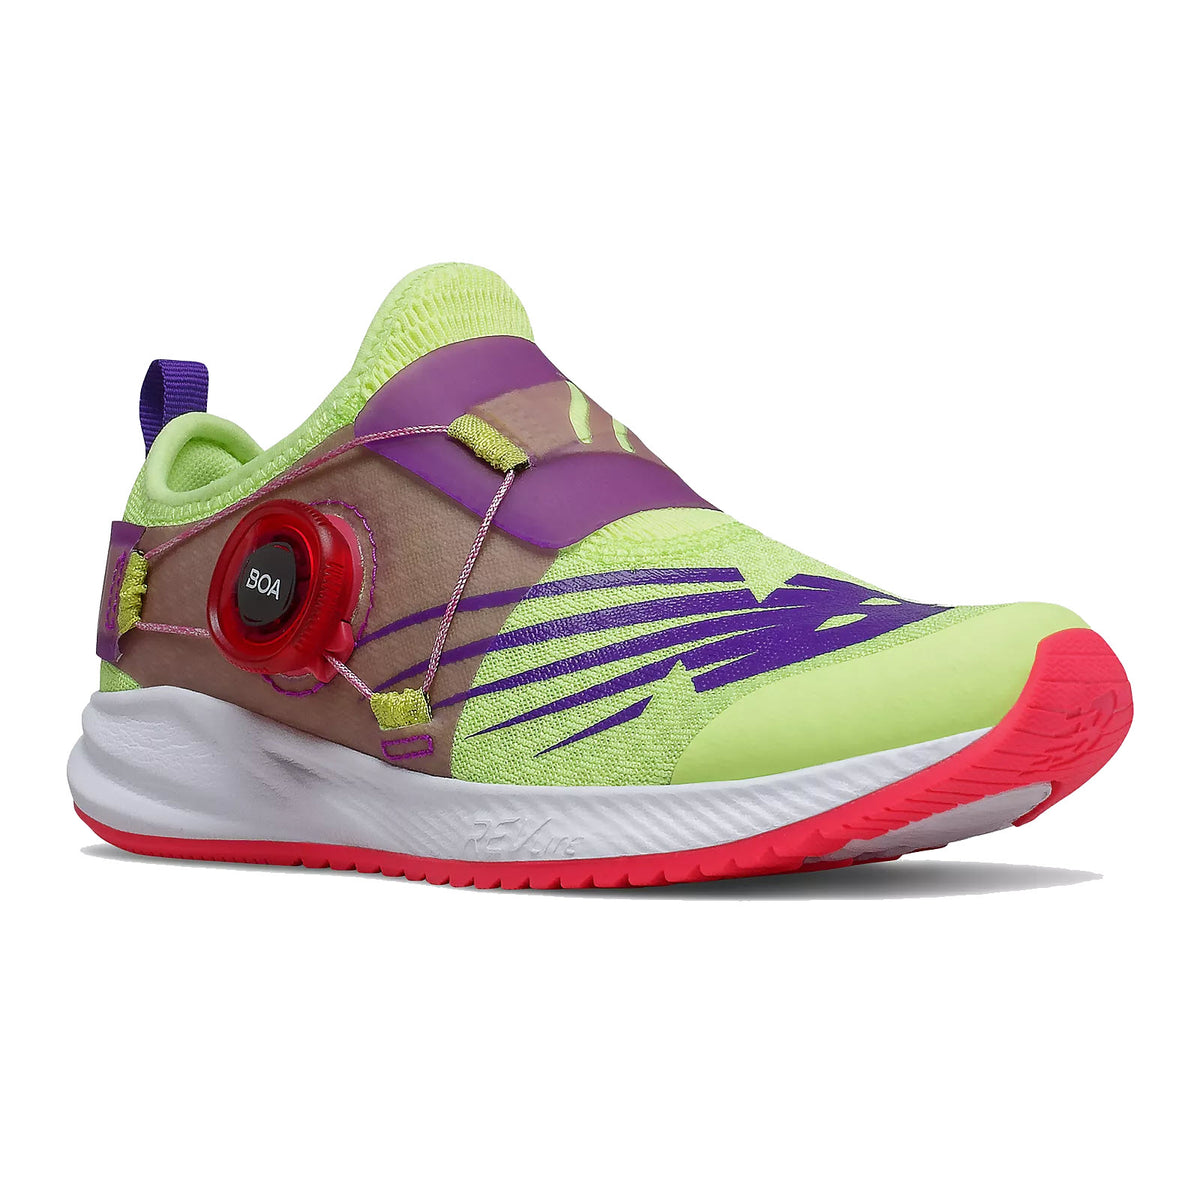 Colorful athletic shoe with a New Balance FUELCORE REVEAL BOA LIME/PINK - KIDS for lacing.